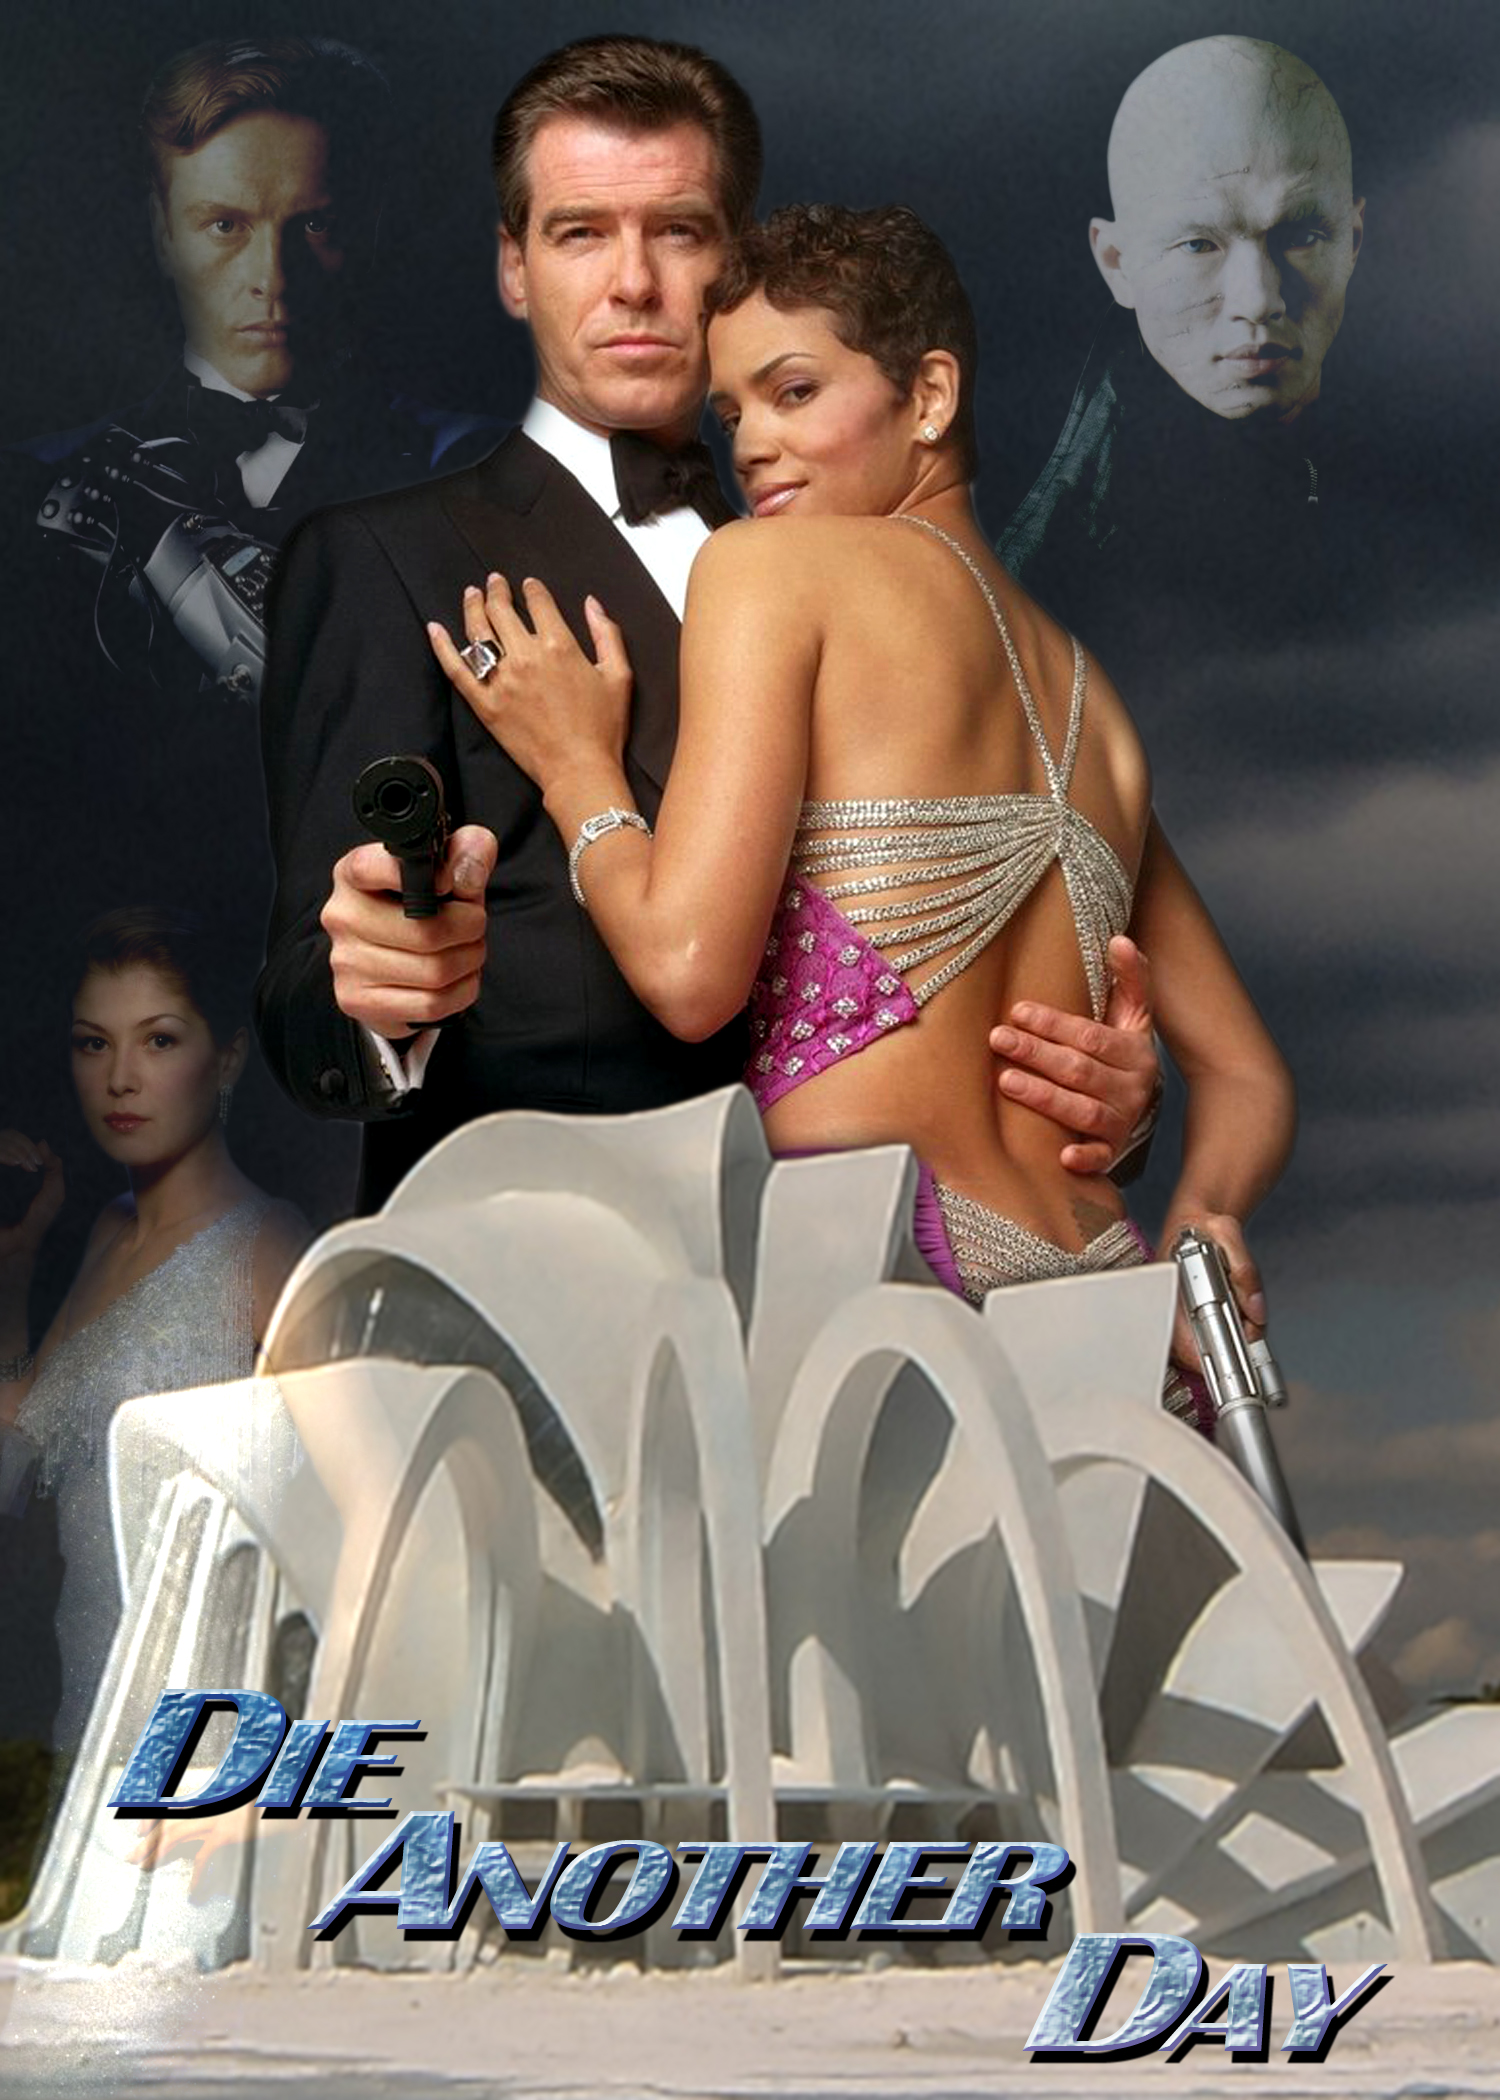 die_another_day_poster_by_comandercool22-d68ldfp.jpg